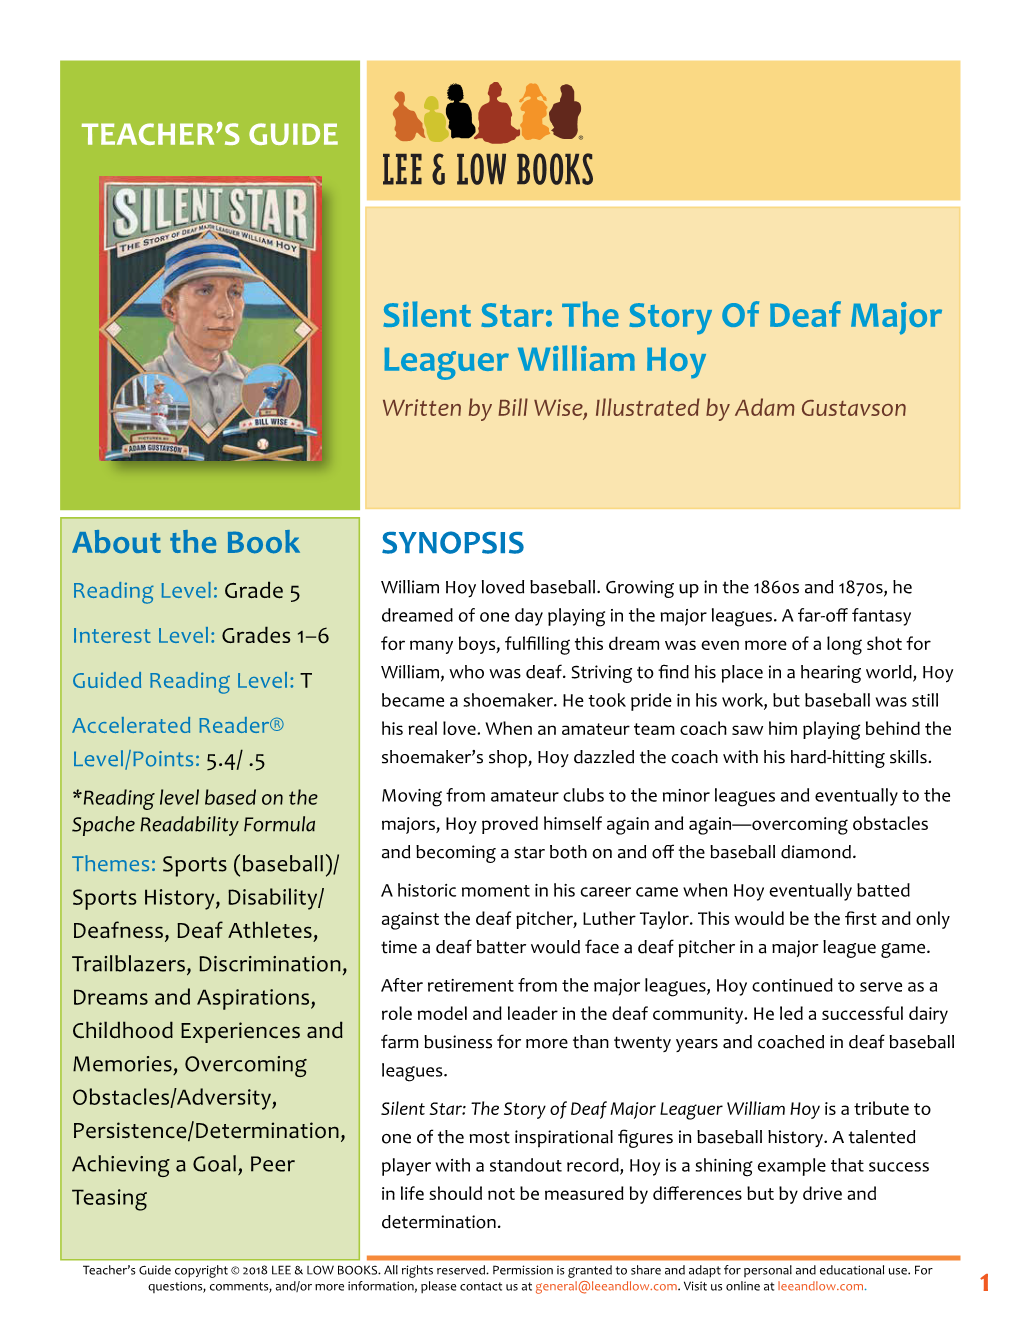 Silent Star: the Story of Deaf Major Leaguer William Hoy Written by Bill Wise, Illustrated by Adam Gustavson